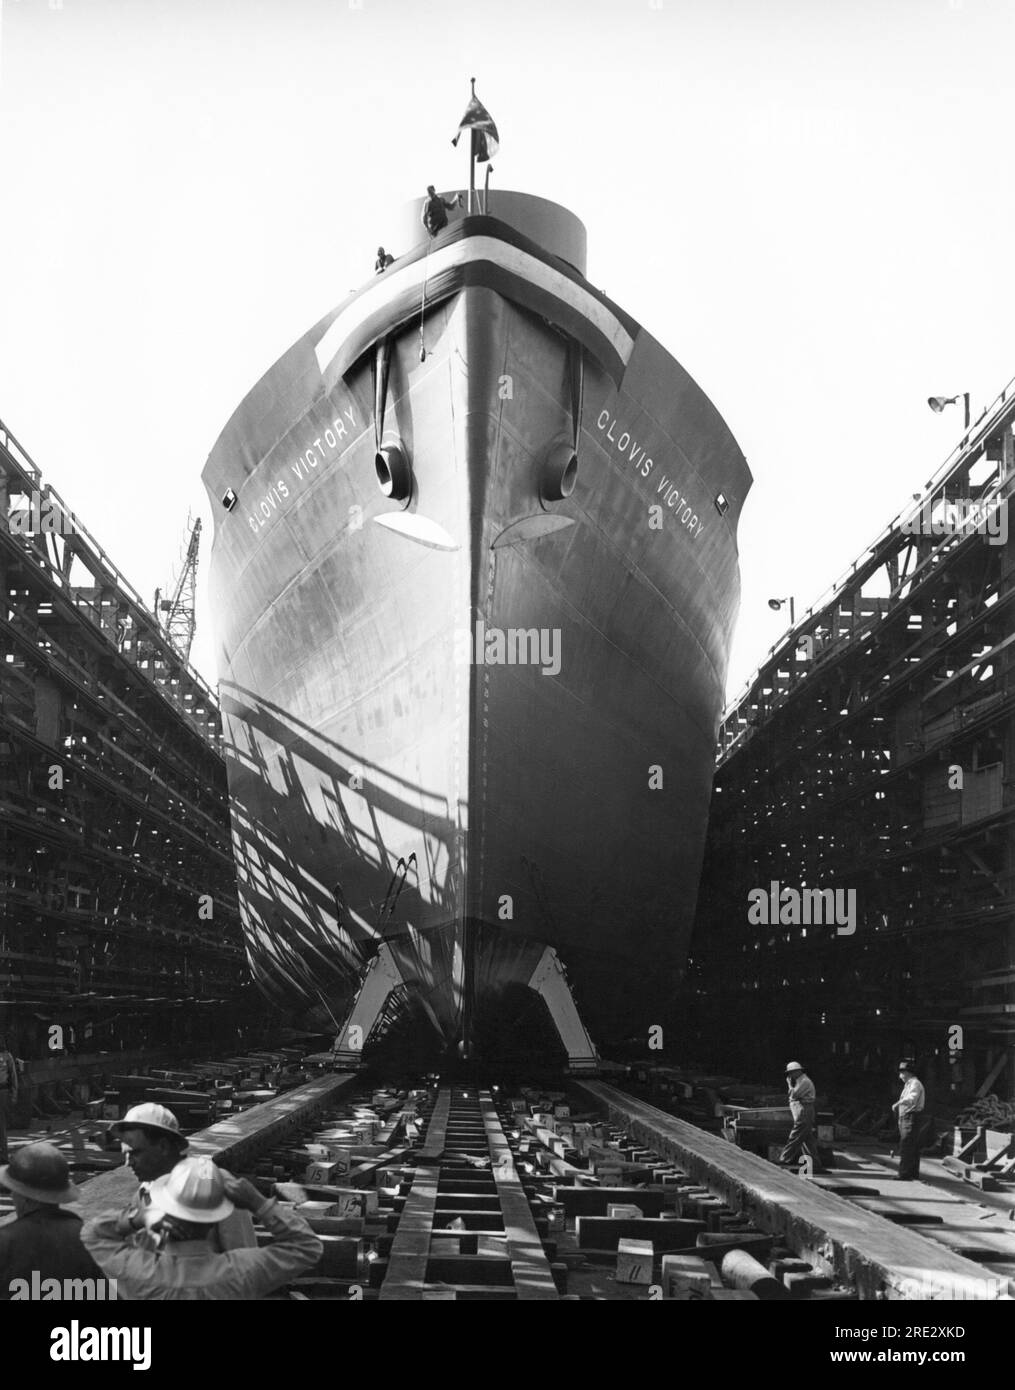 Long Beach, California:  July 8, 1944 The launching of the WWII Victory ship, the S.S. Clovis Victory, at the Terminal Island shipbuilding yard. Stock Photo